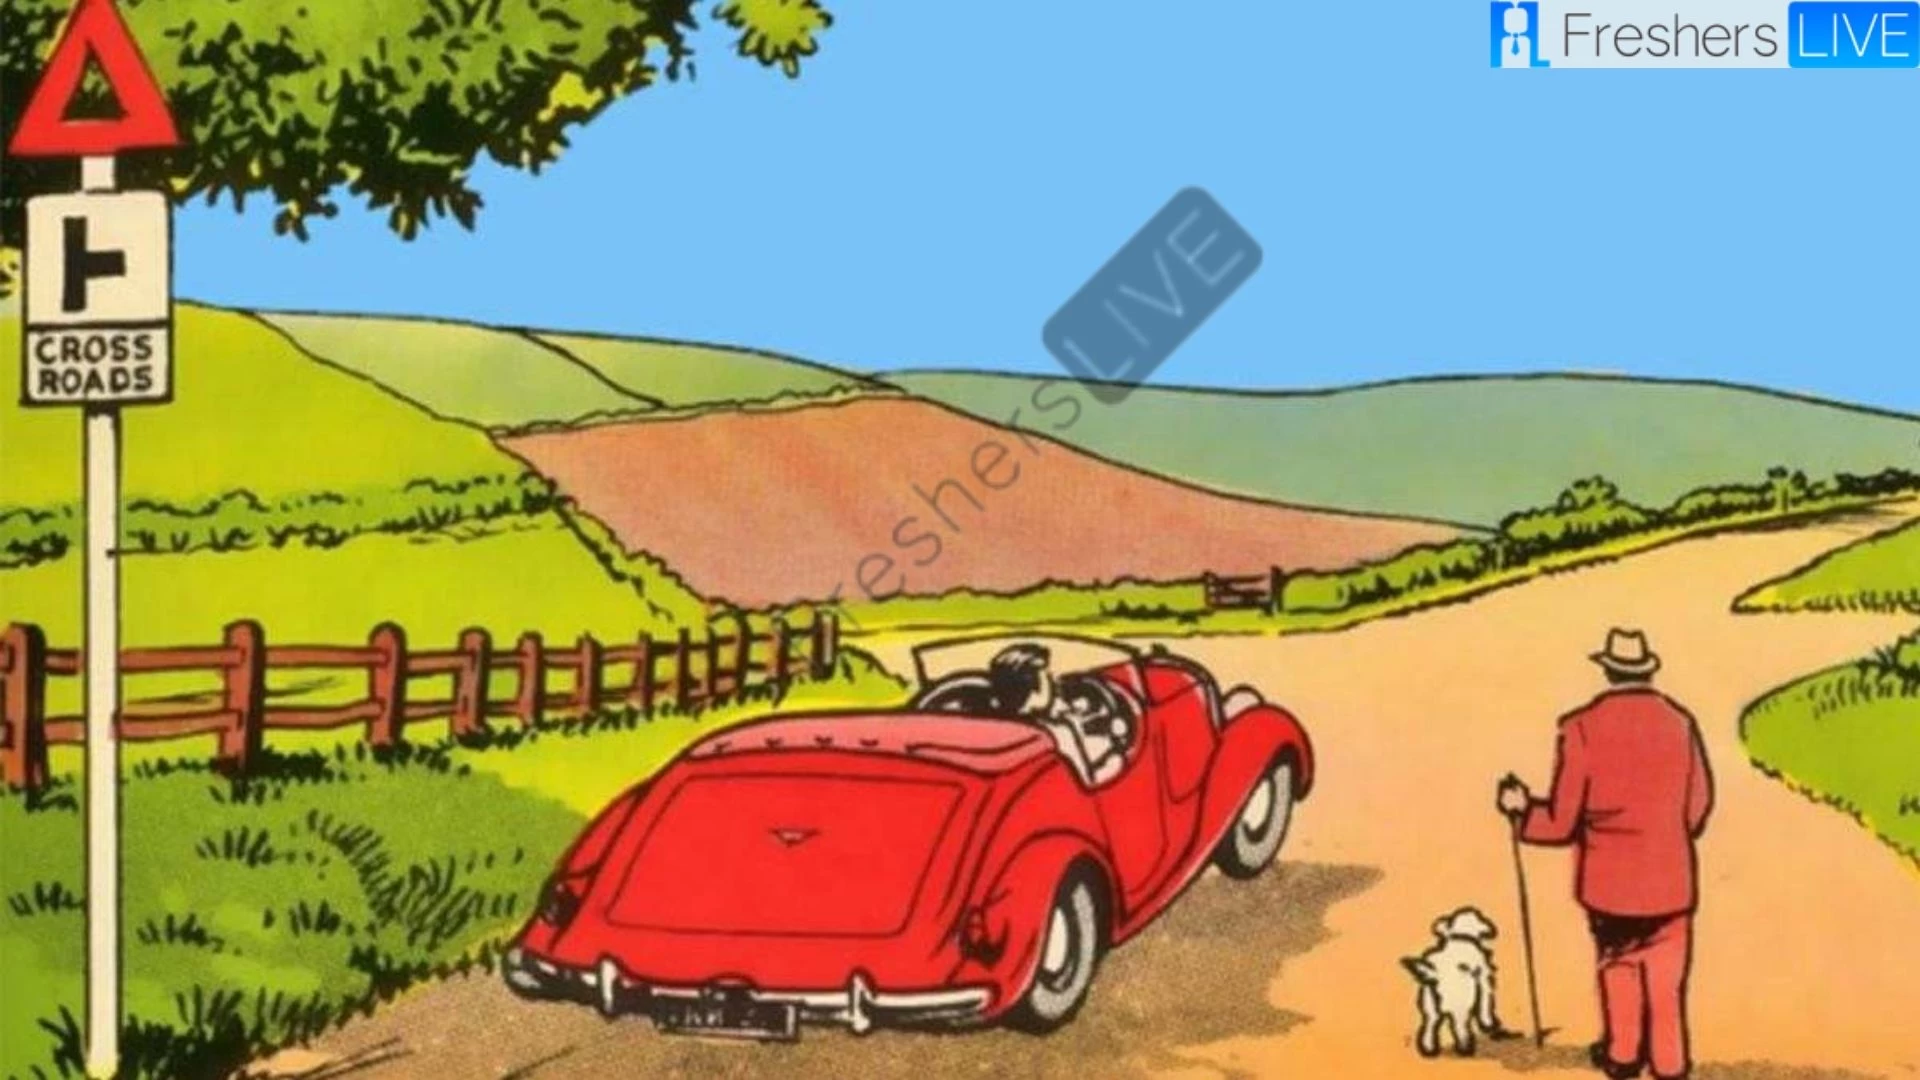 You Are A High IQ Genius If You Can Tell What’s Wrong With This Baffling Red Car Image In 9 Seconds!